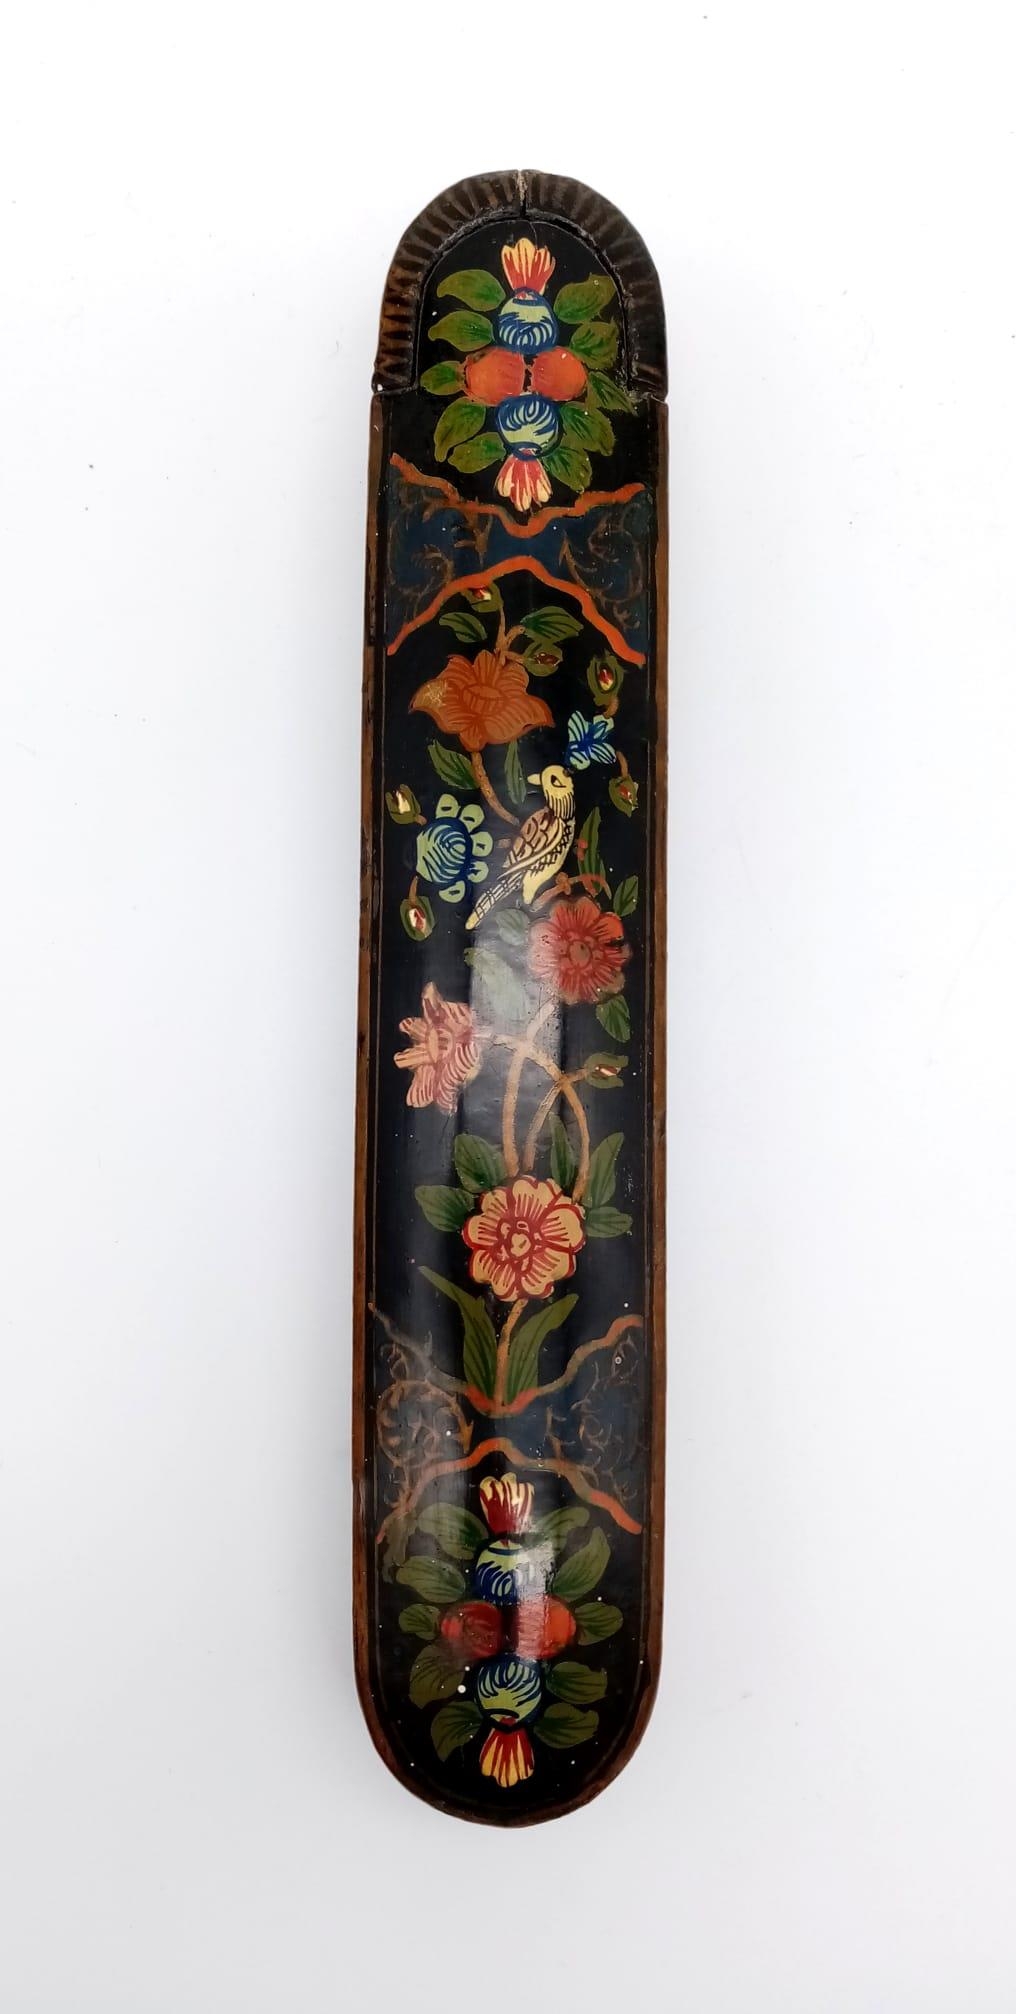 An early Persian Islamic Ghajavi pen box, known as Gol o Bol Boll. Hand painted with flowers and - Image 3 of 7